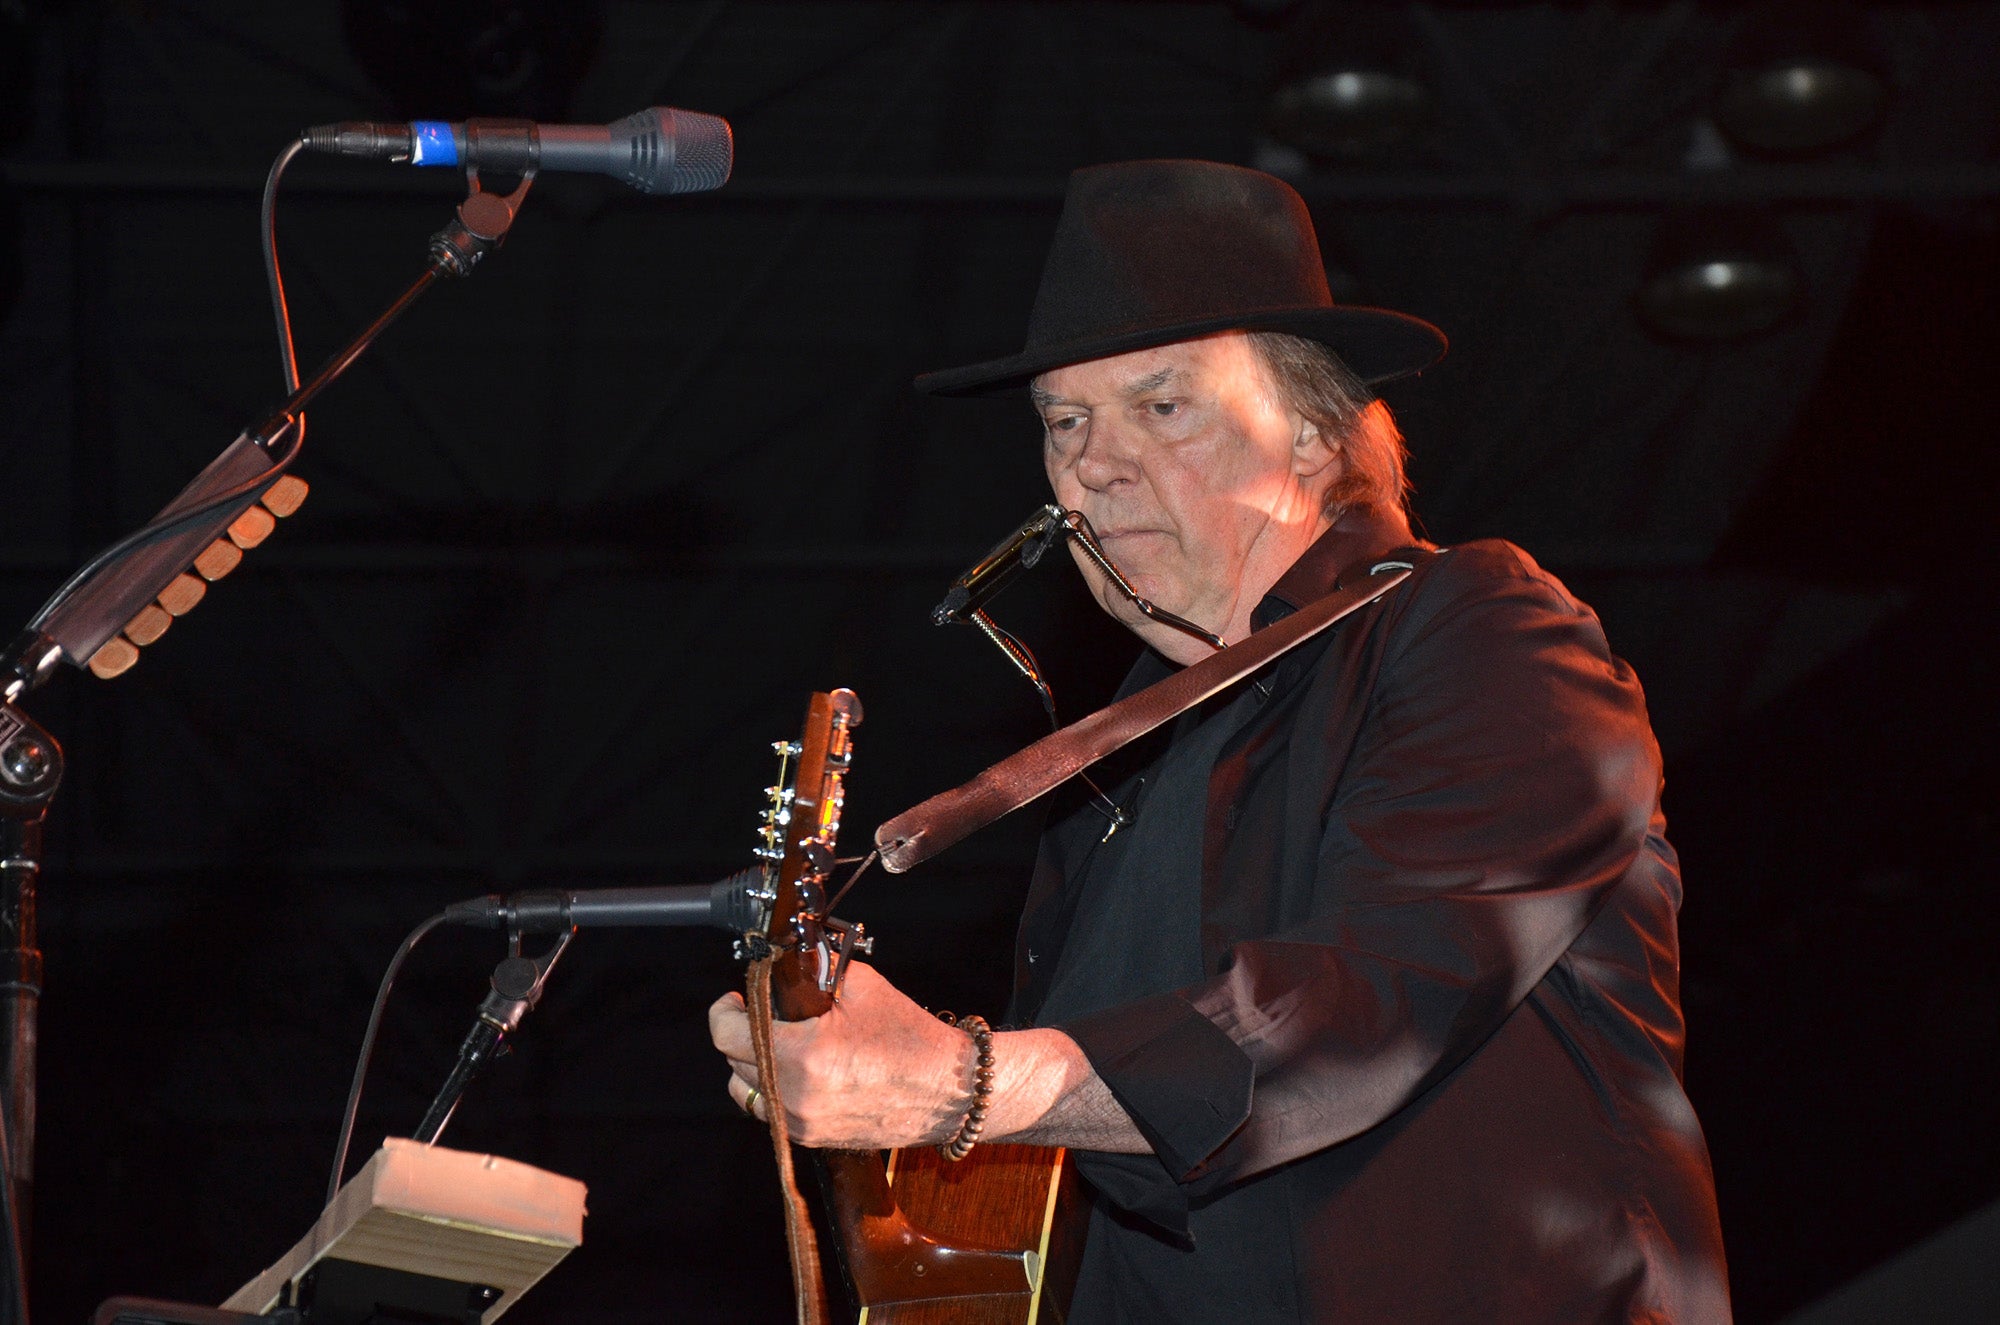 Rocker Neil Young raised half a million dollars to popularize Pono, his high-fidelity format for downloading music, in a challenge to MP3s.